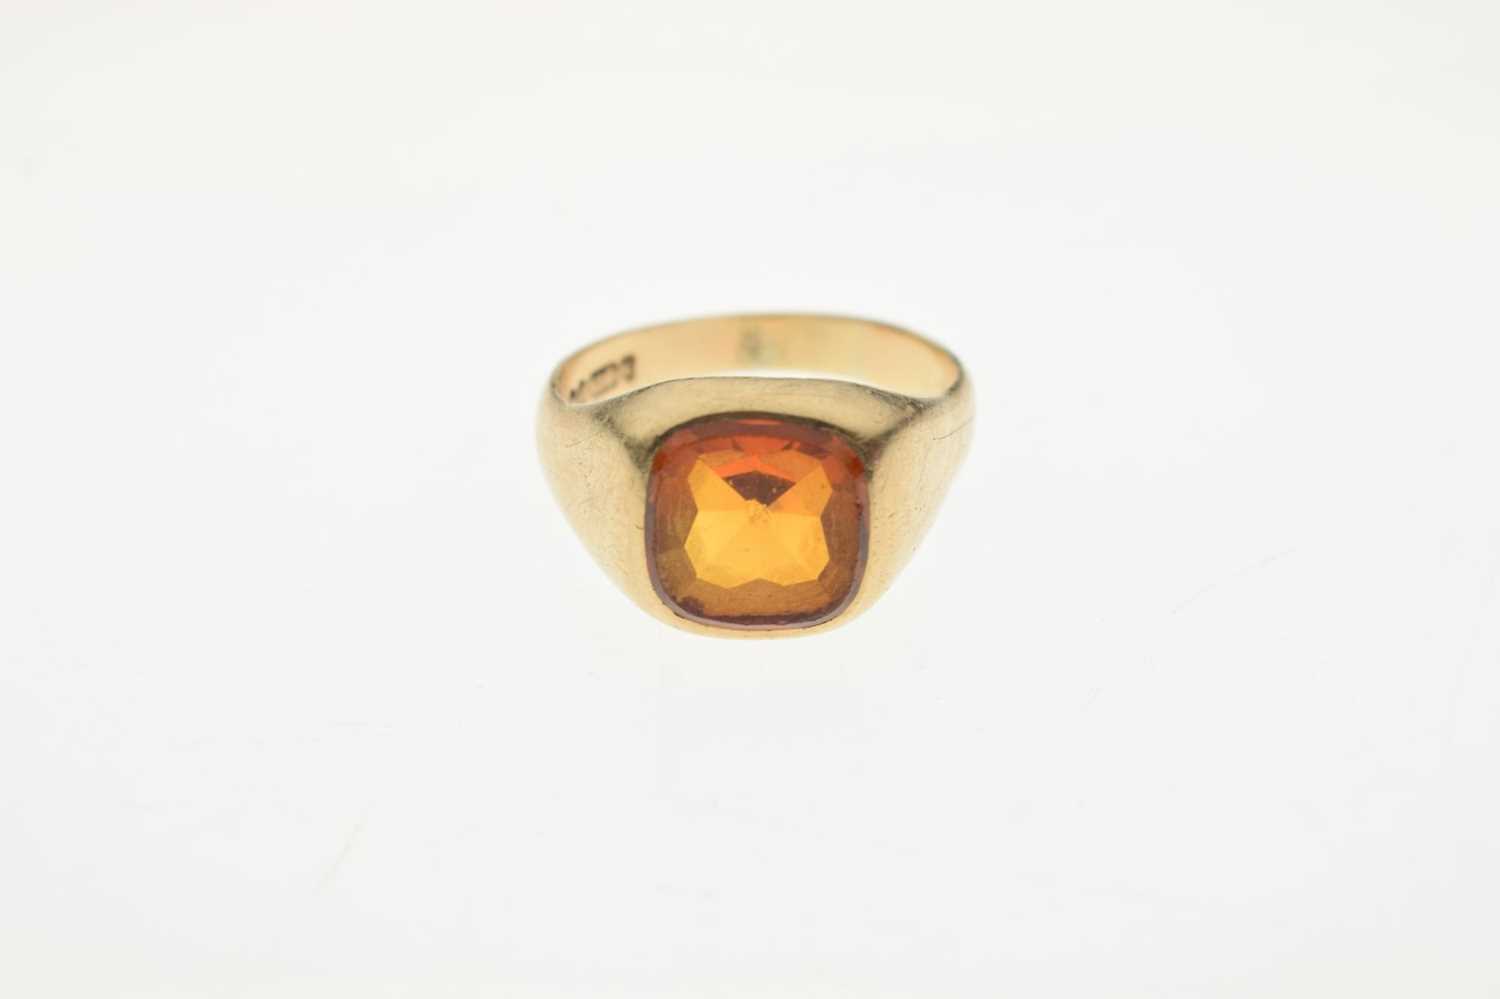 9ct gold ring set an orange-coloured faceted cushion-shaped stone - Image 6 of 6